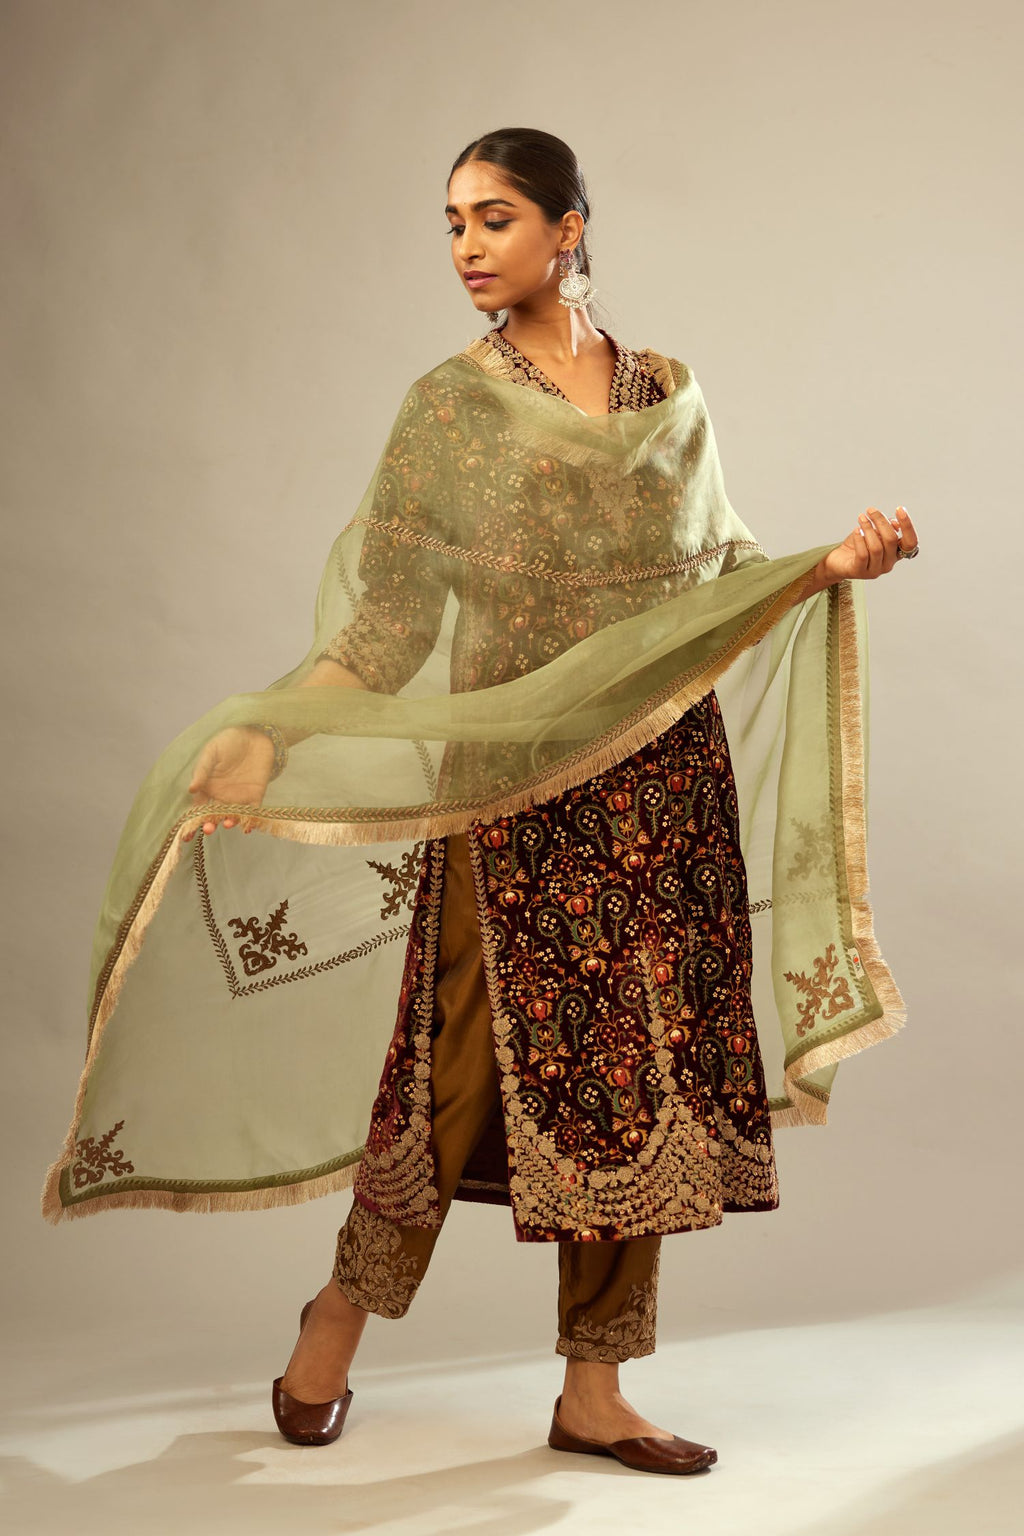 Olive silk organza dupatta detailed with all-over light gold dori embroidery.